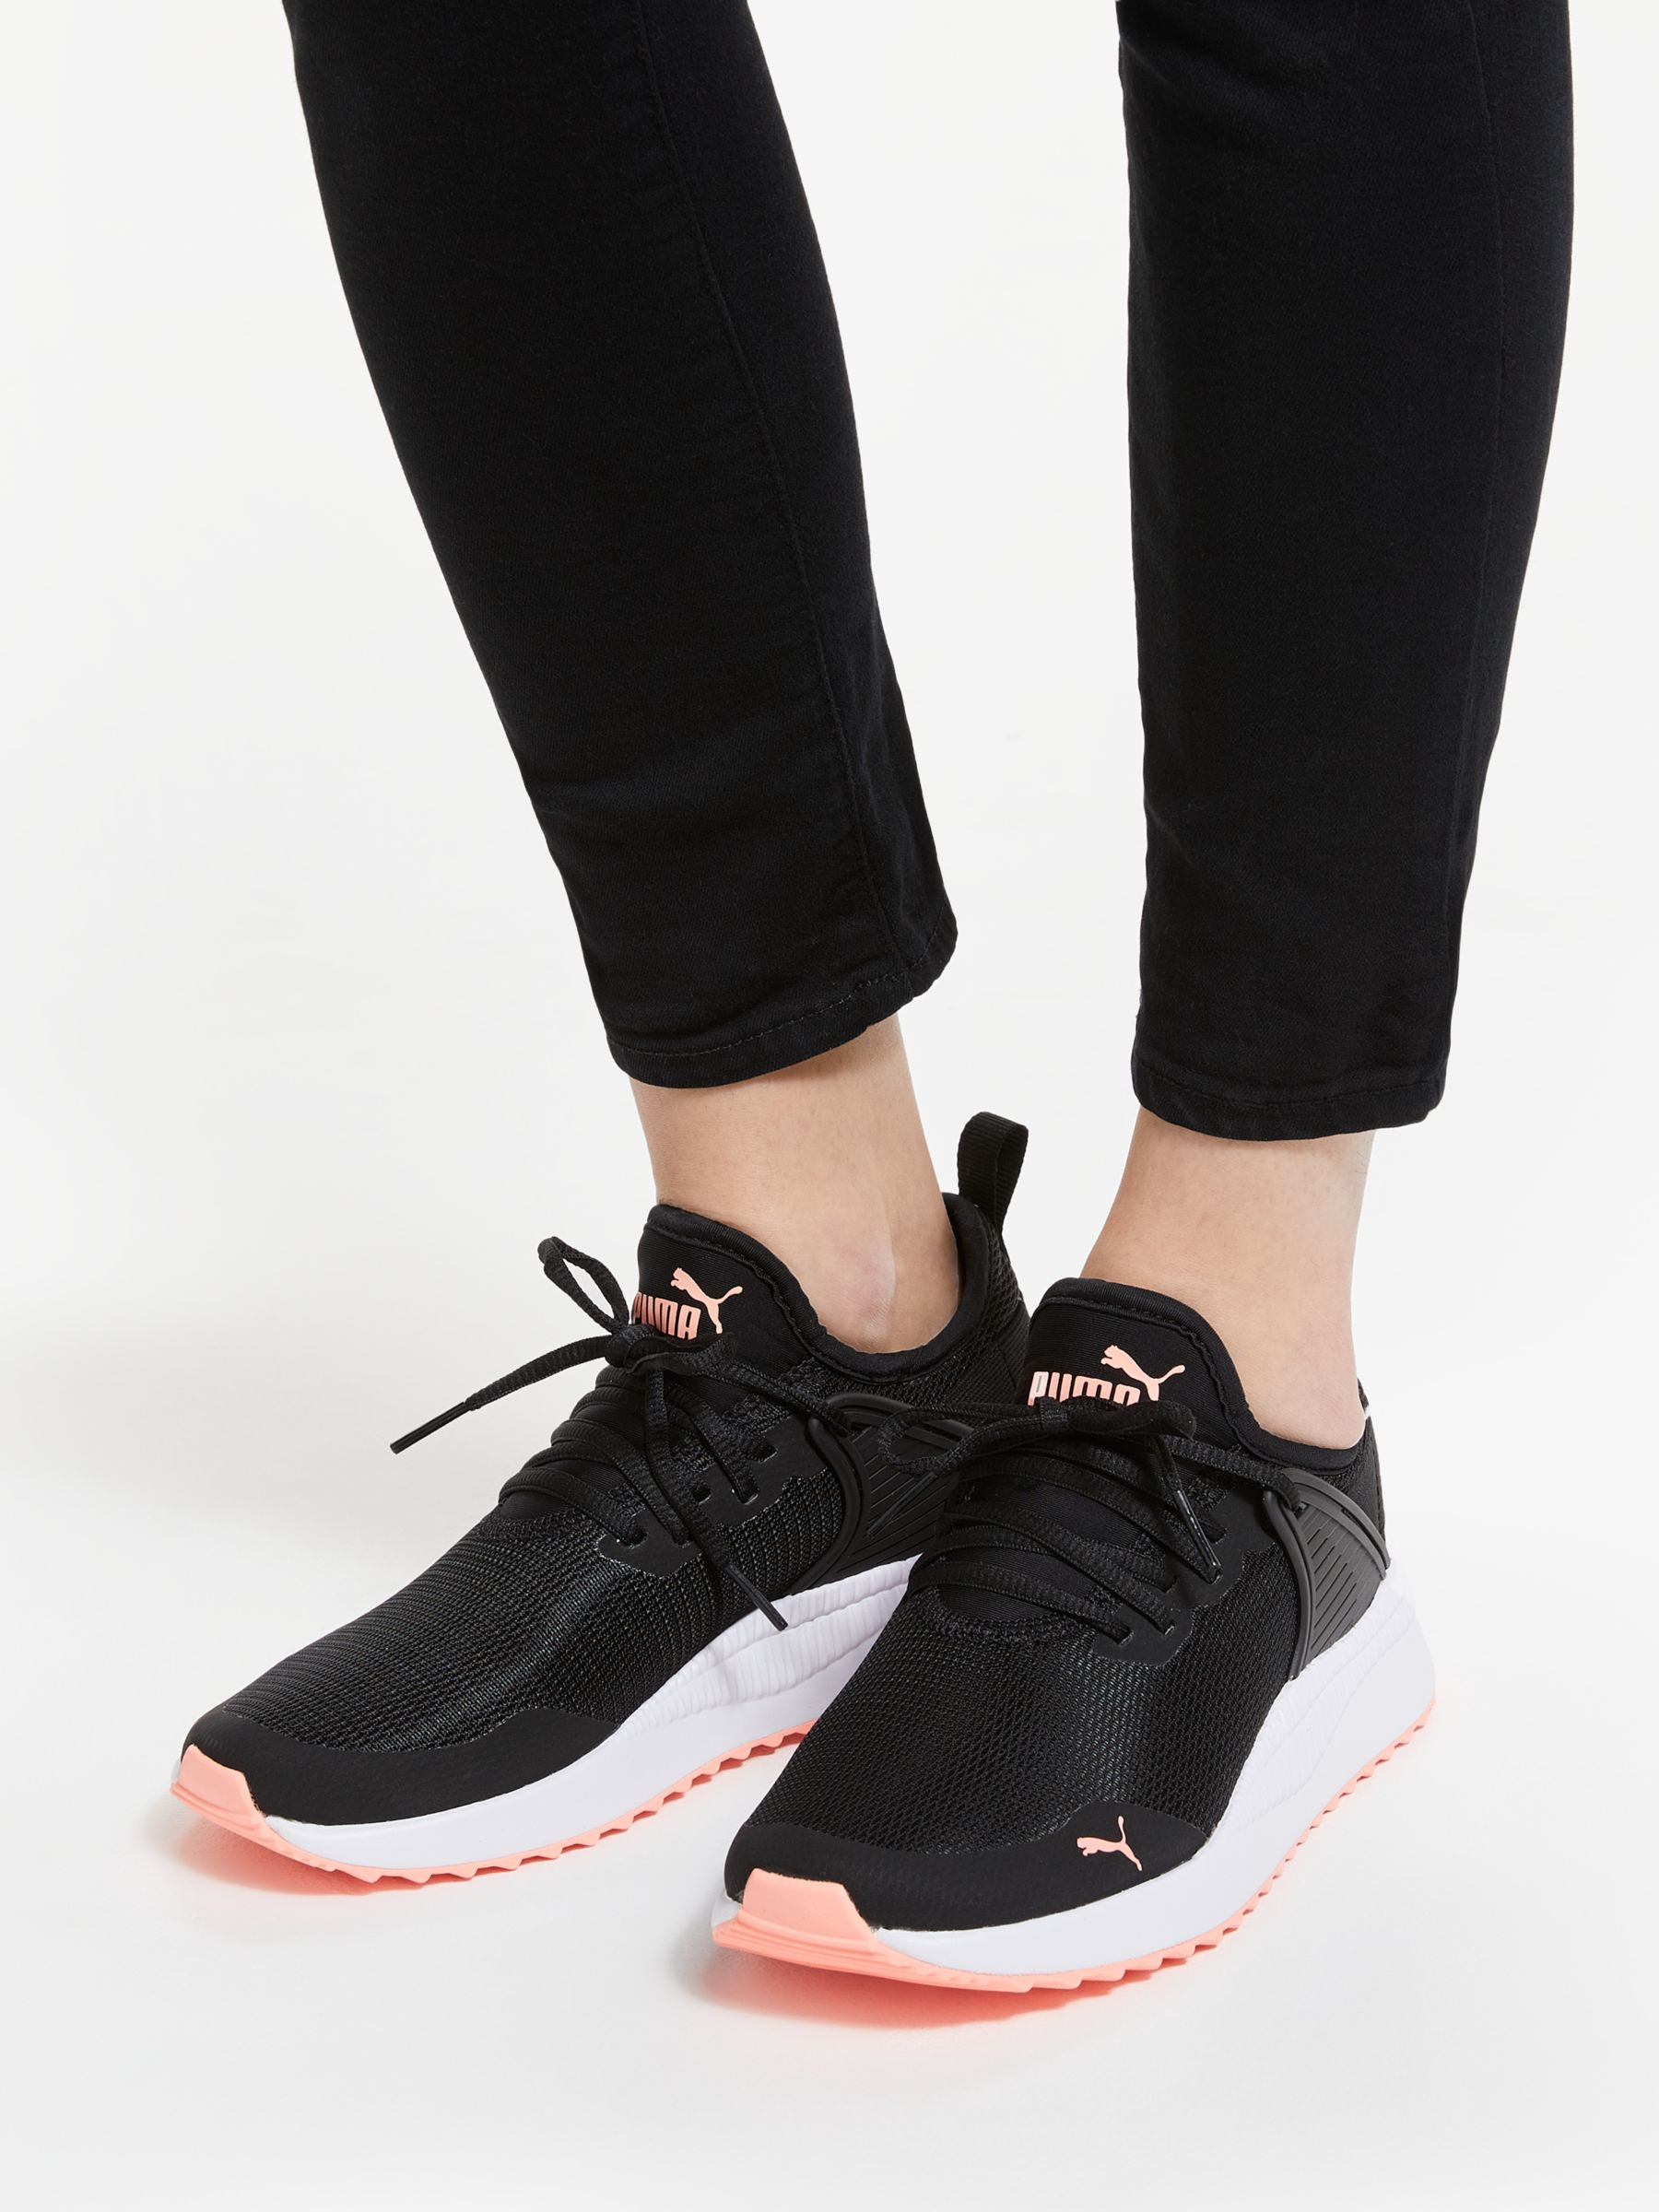 PUMA Pacer Next Cage Women's Trainers 